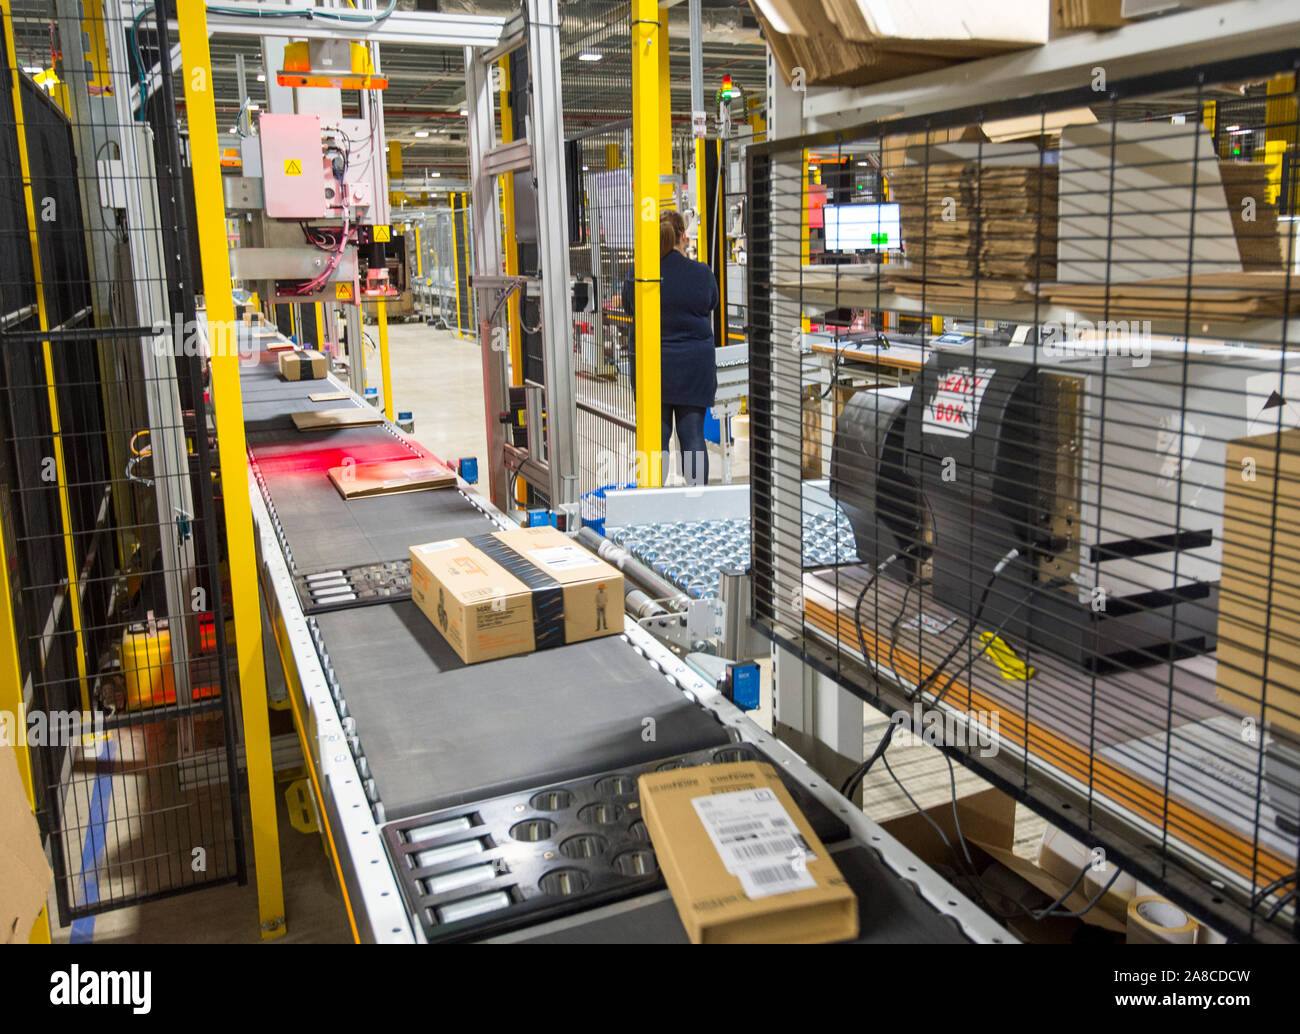 The Robotic operation of an Amazon warehouse in the Midlands of the  England. The state of the art robotics helps optimise the supply chain and  reduce human labour costs Stock Photo -